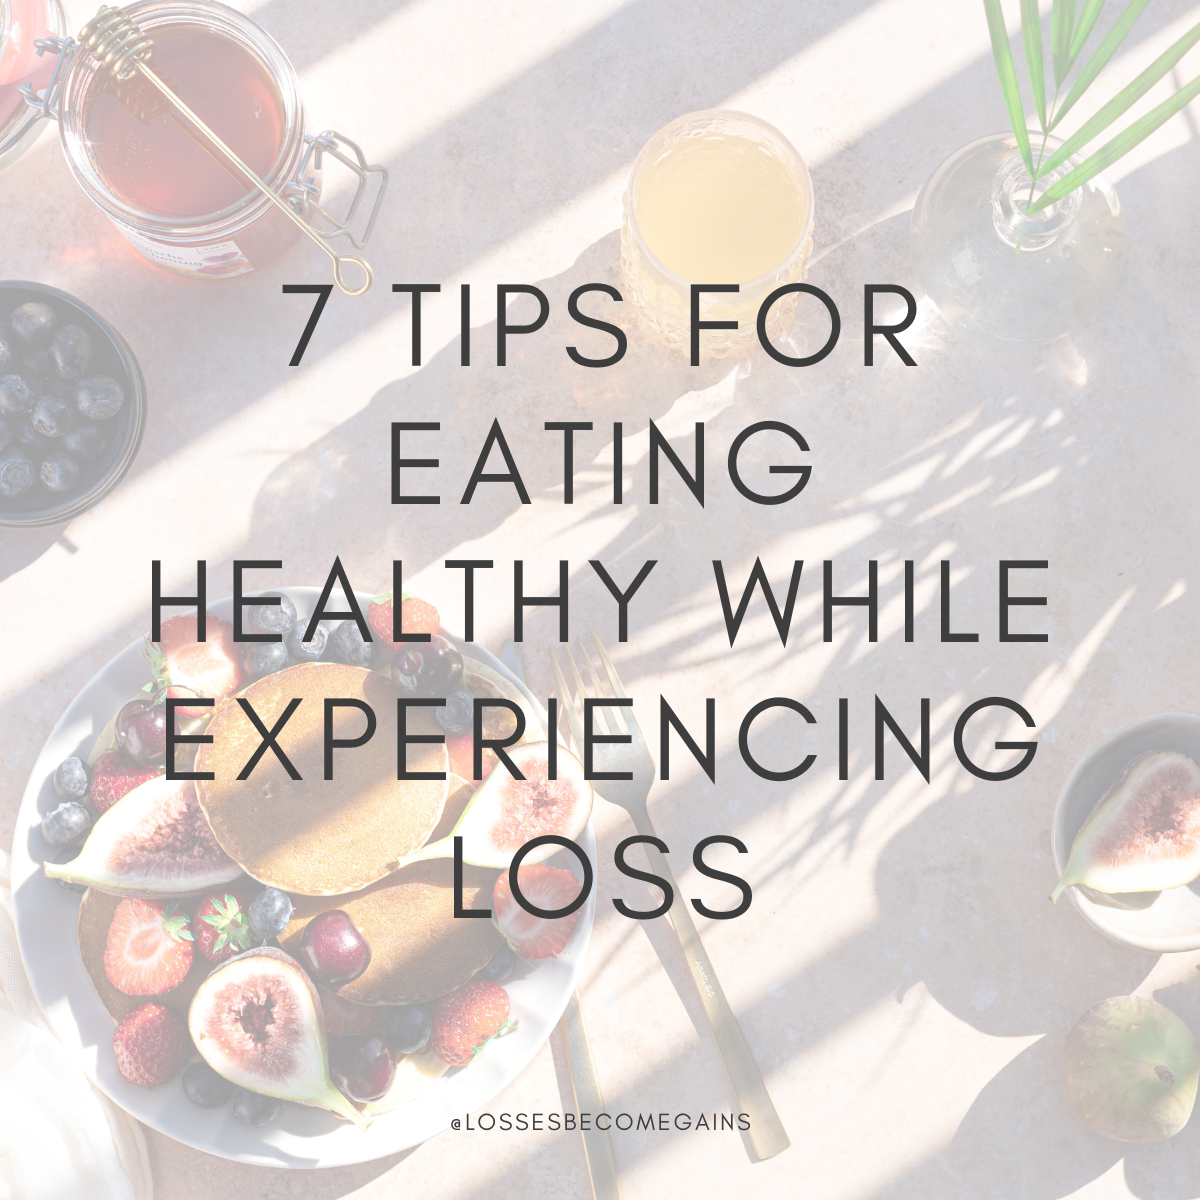 7 tips for eating healthy while experiencing loss